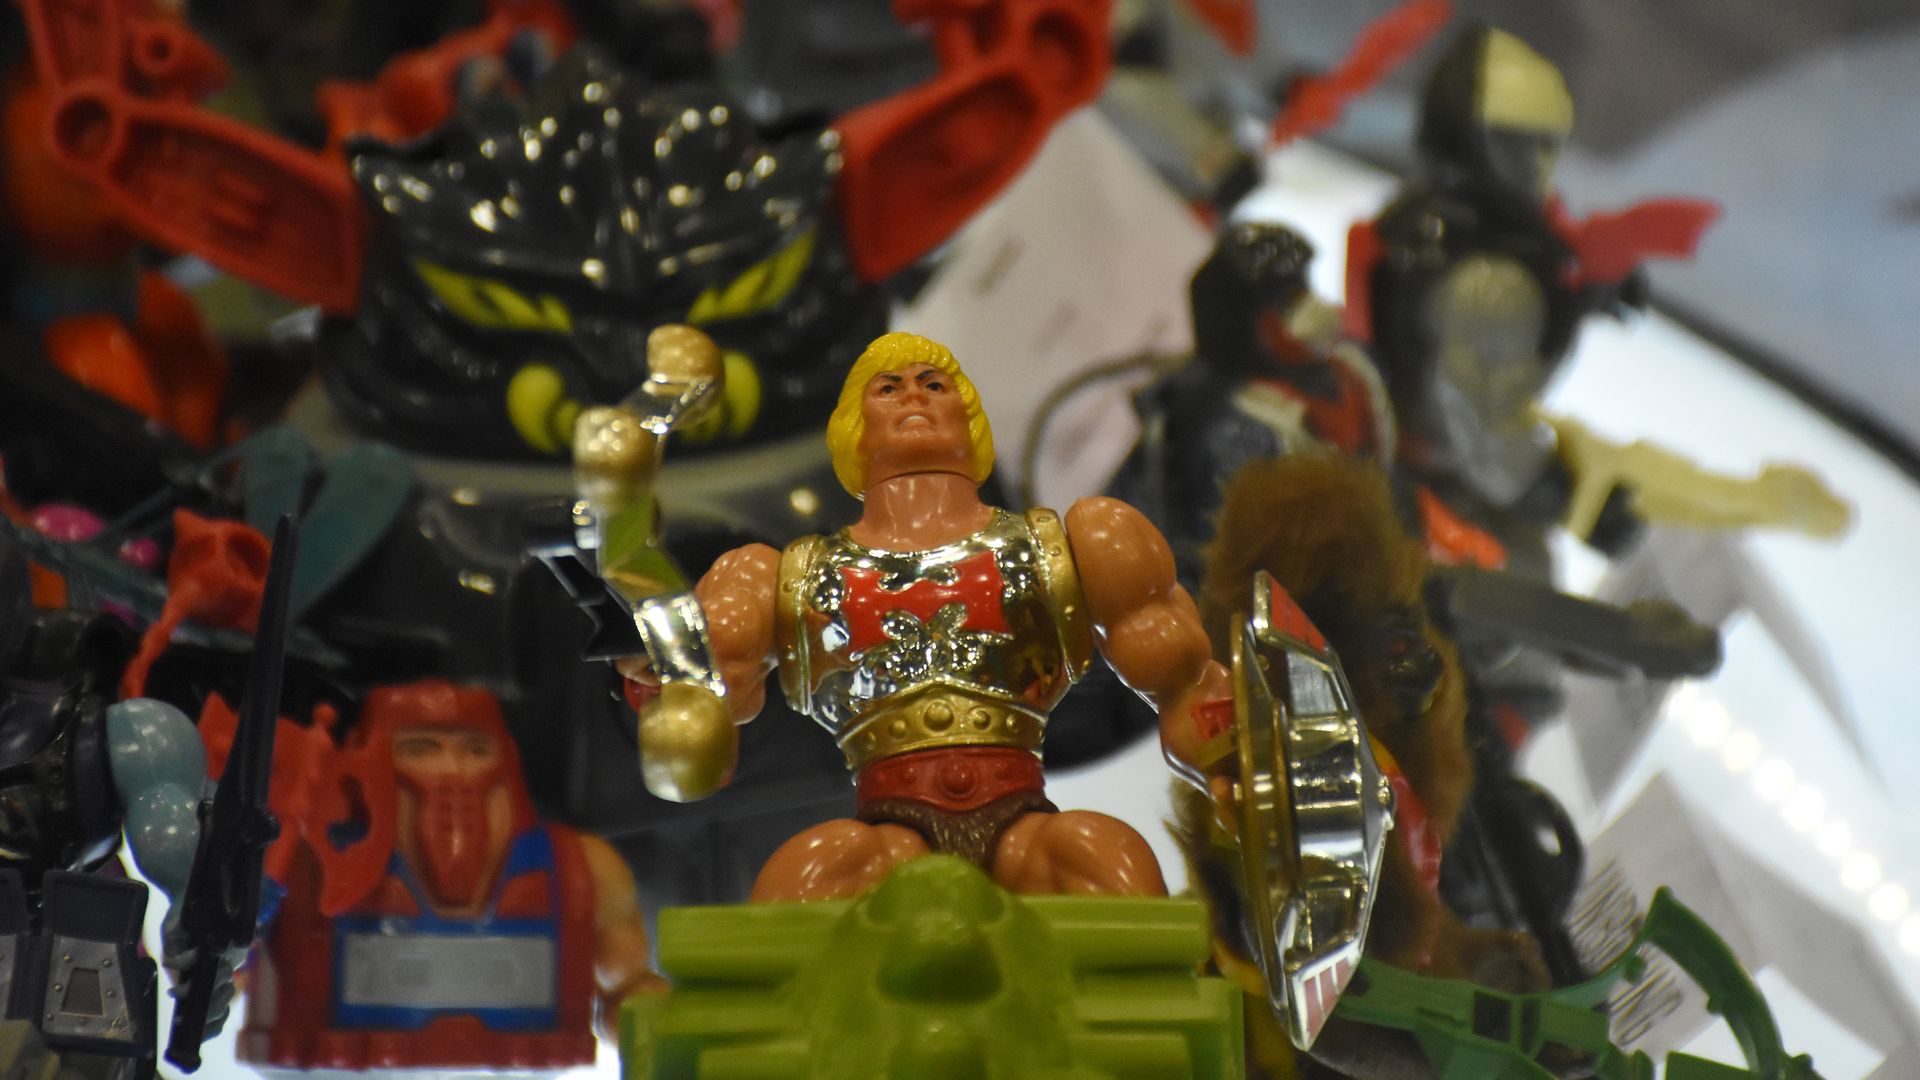 He-Man action figure toy under holiday tree